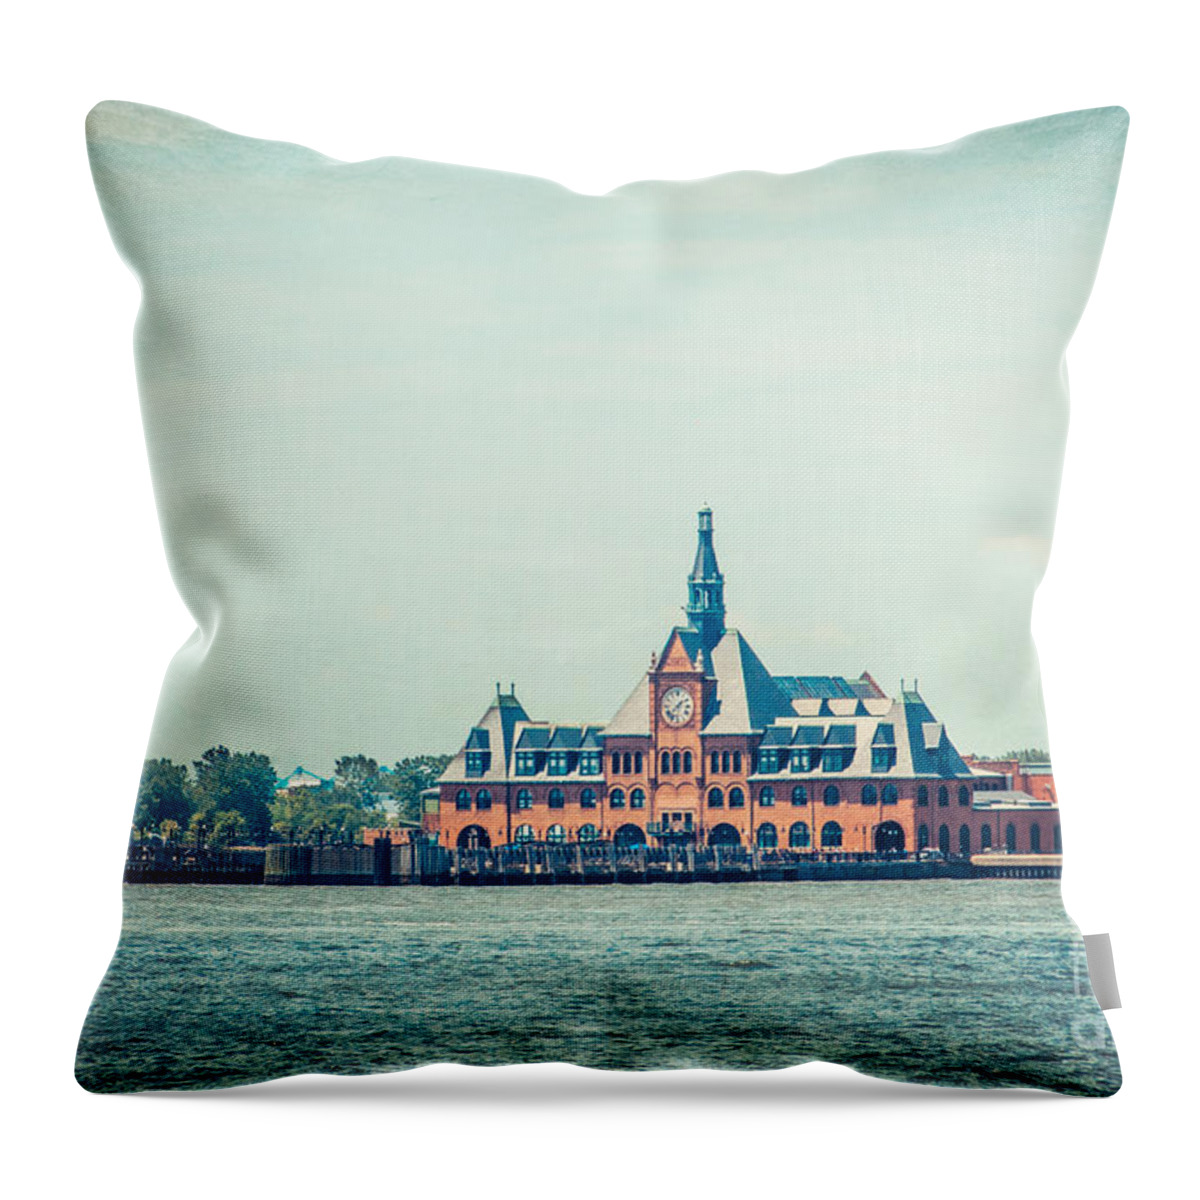 Nyc Throw Pillow featuring the photograph Central Railroad Terminal of New Jersey by Hannes Cmarits